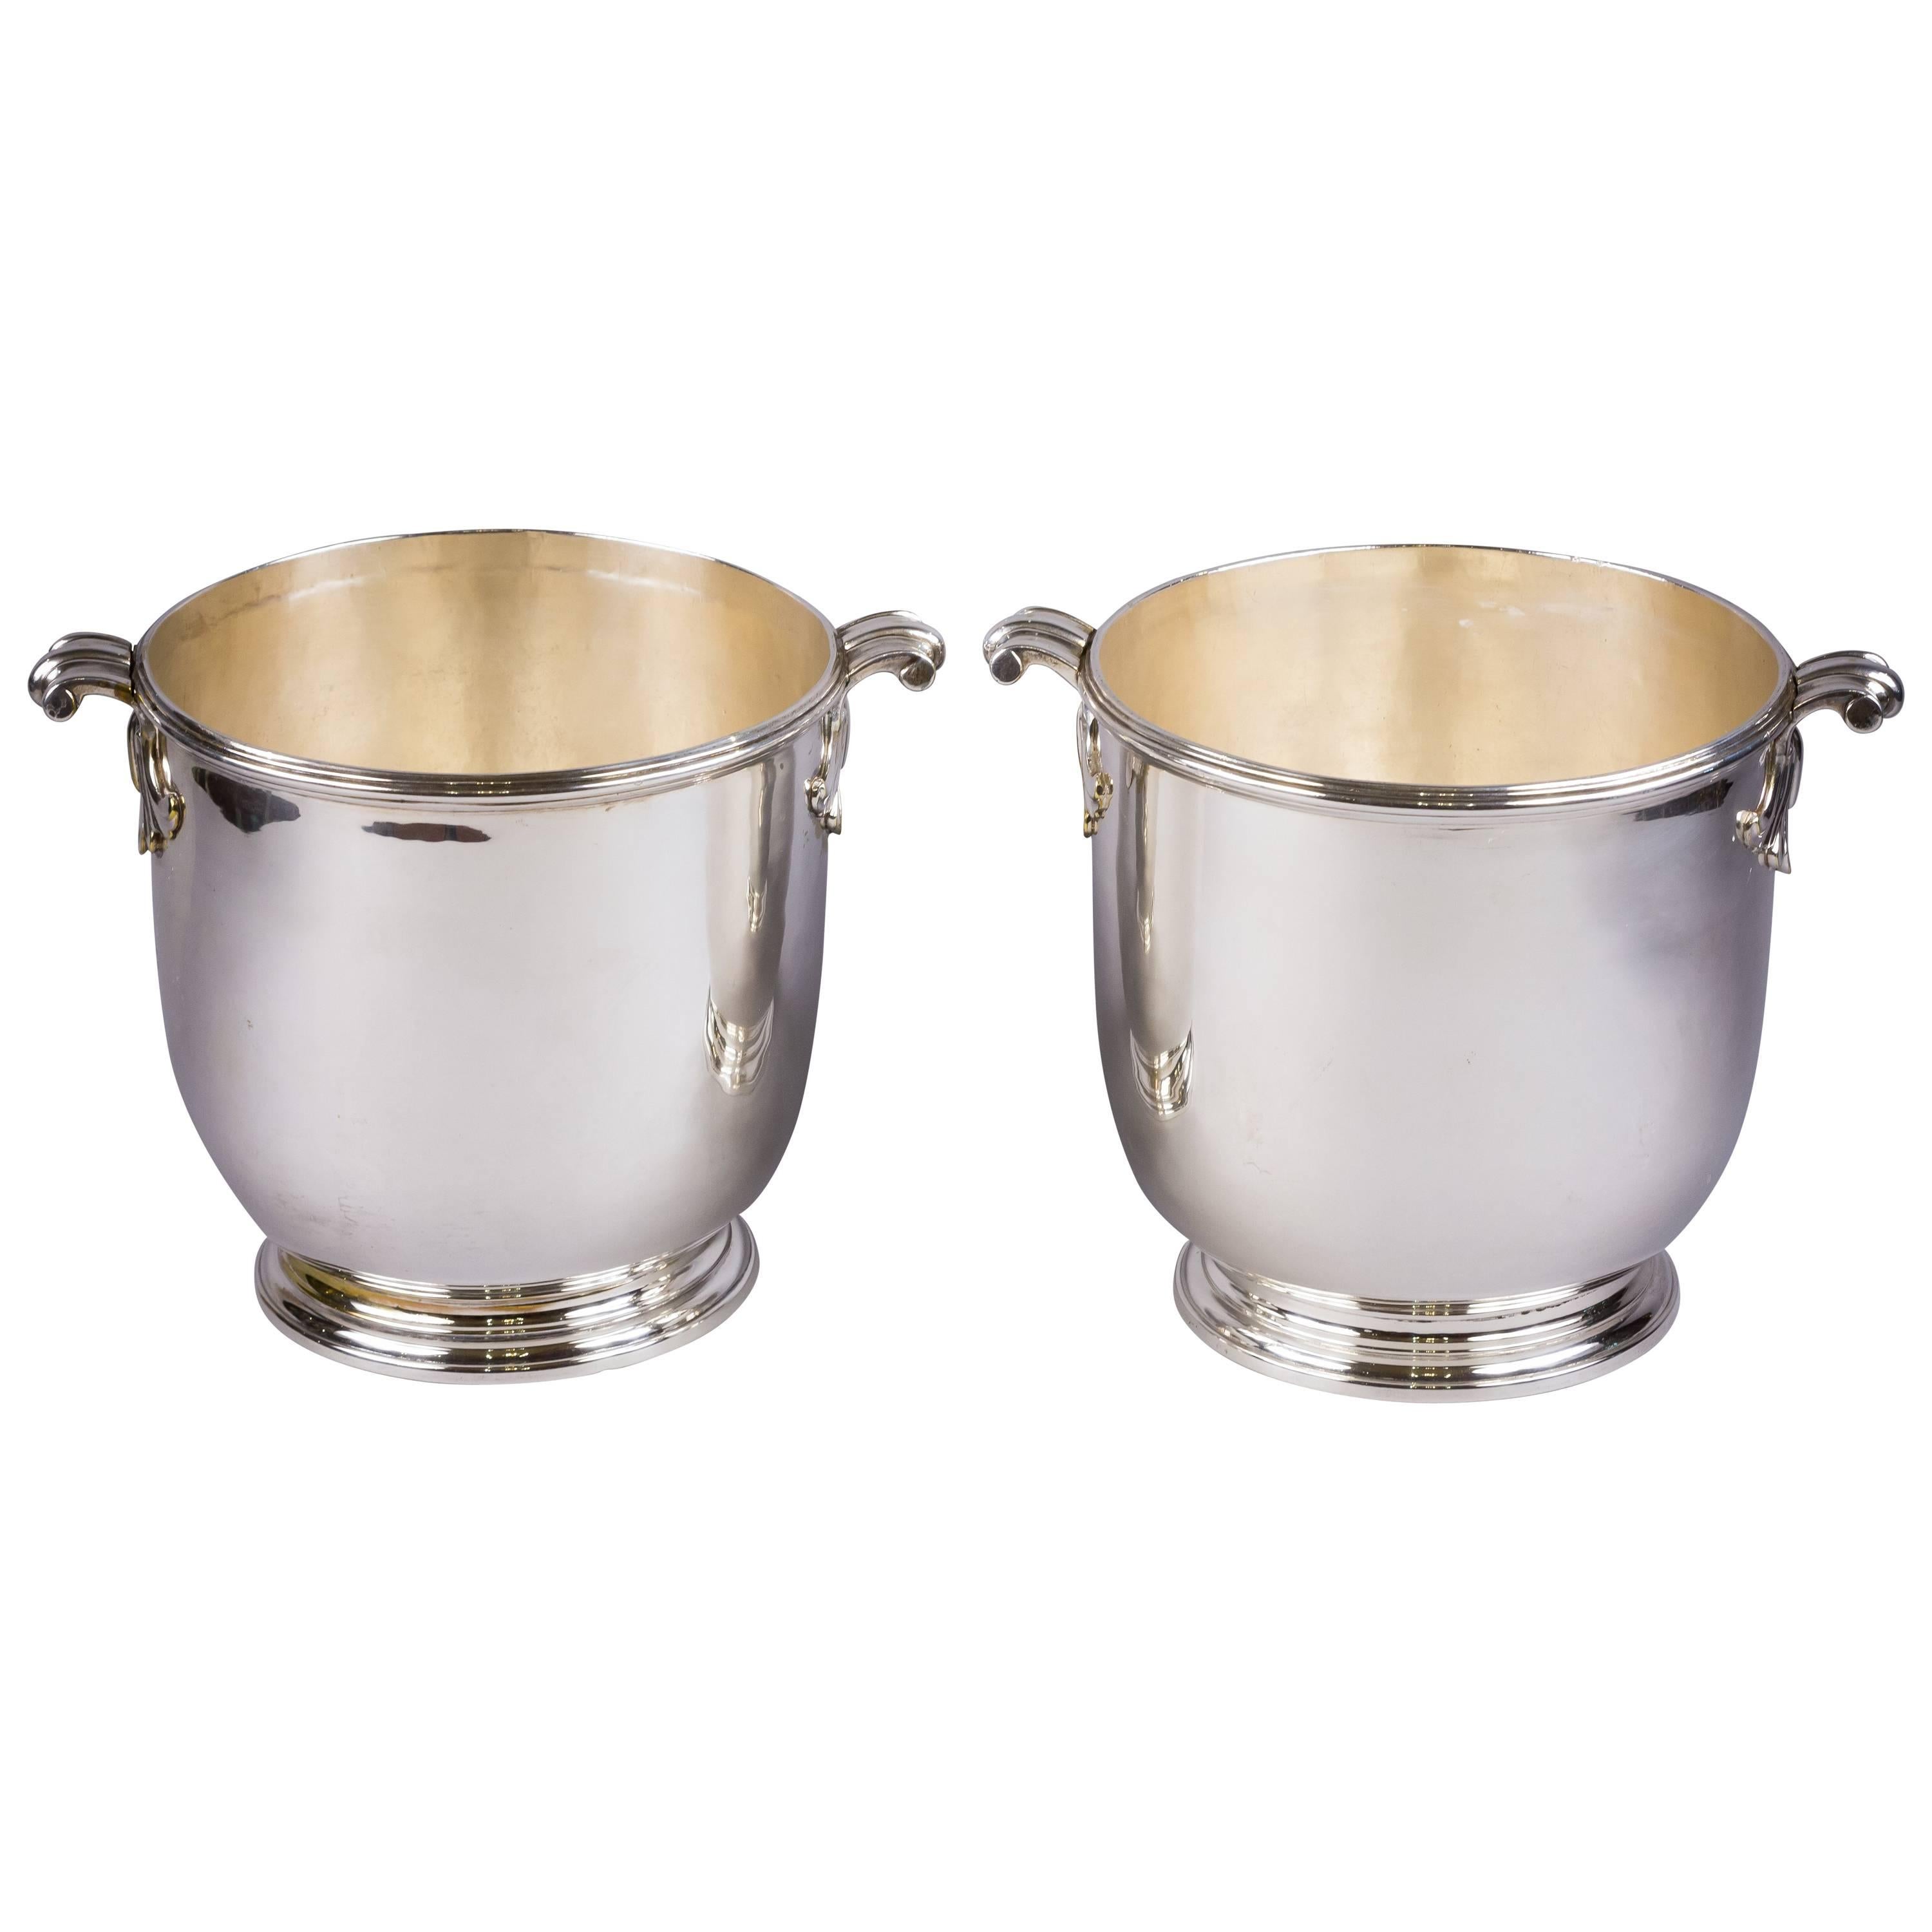 Pair of French Silver Plated Wine Coolers, circa 1880